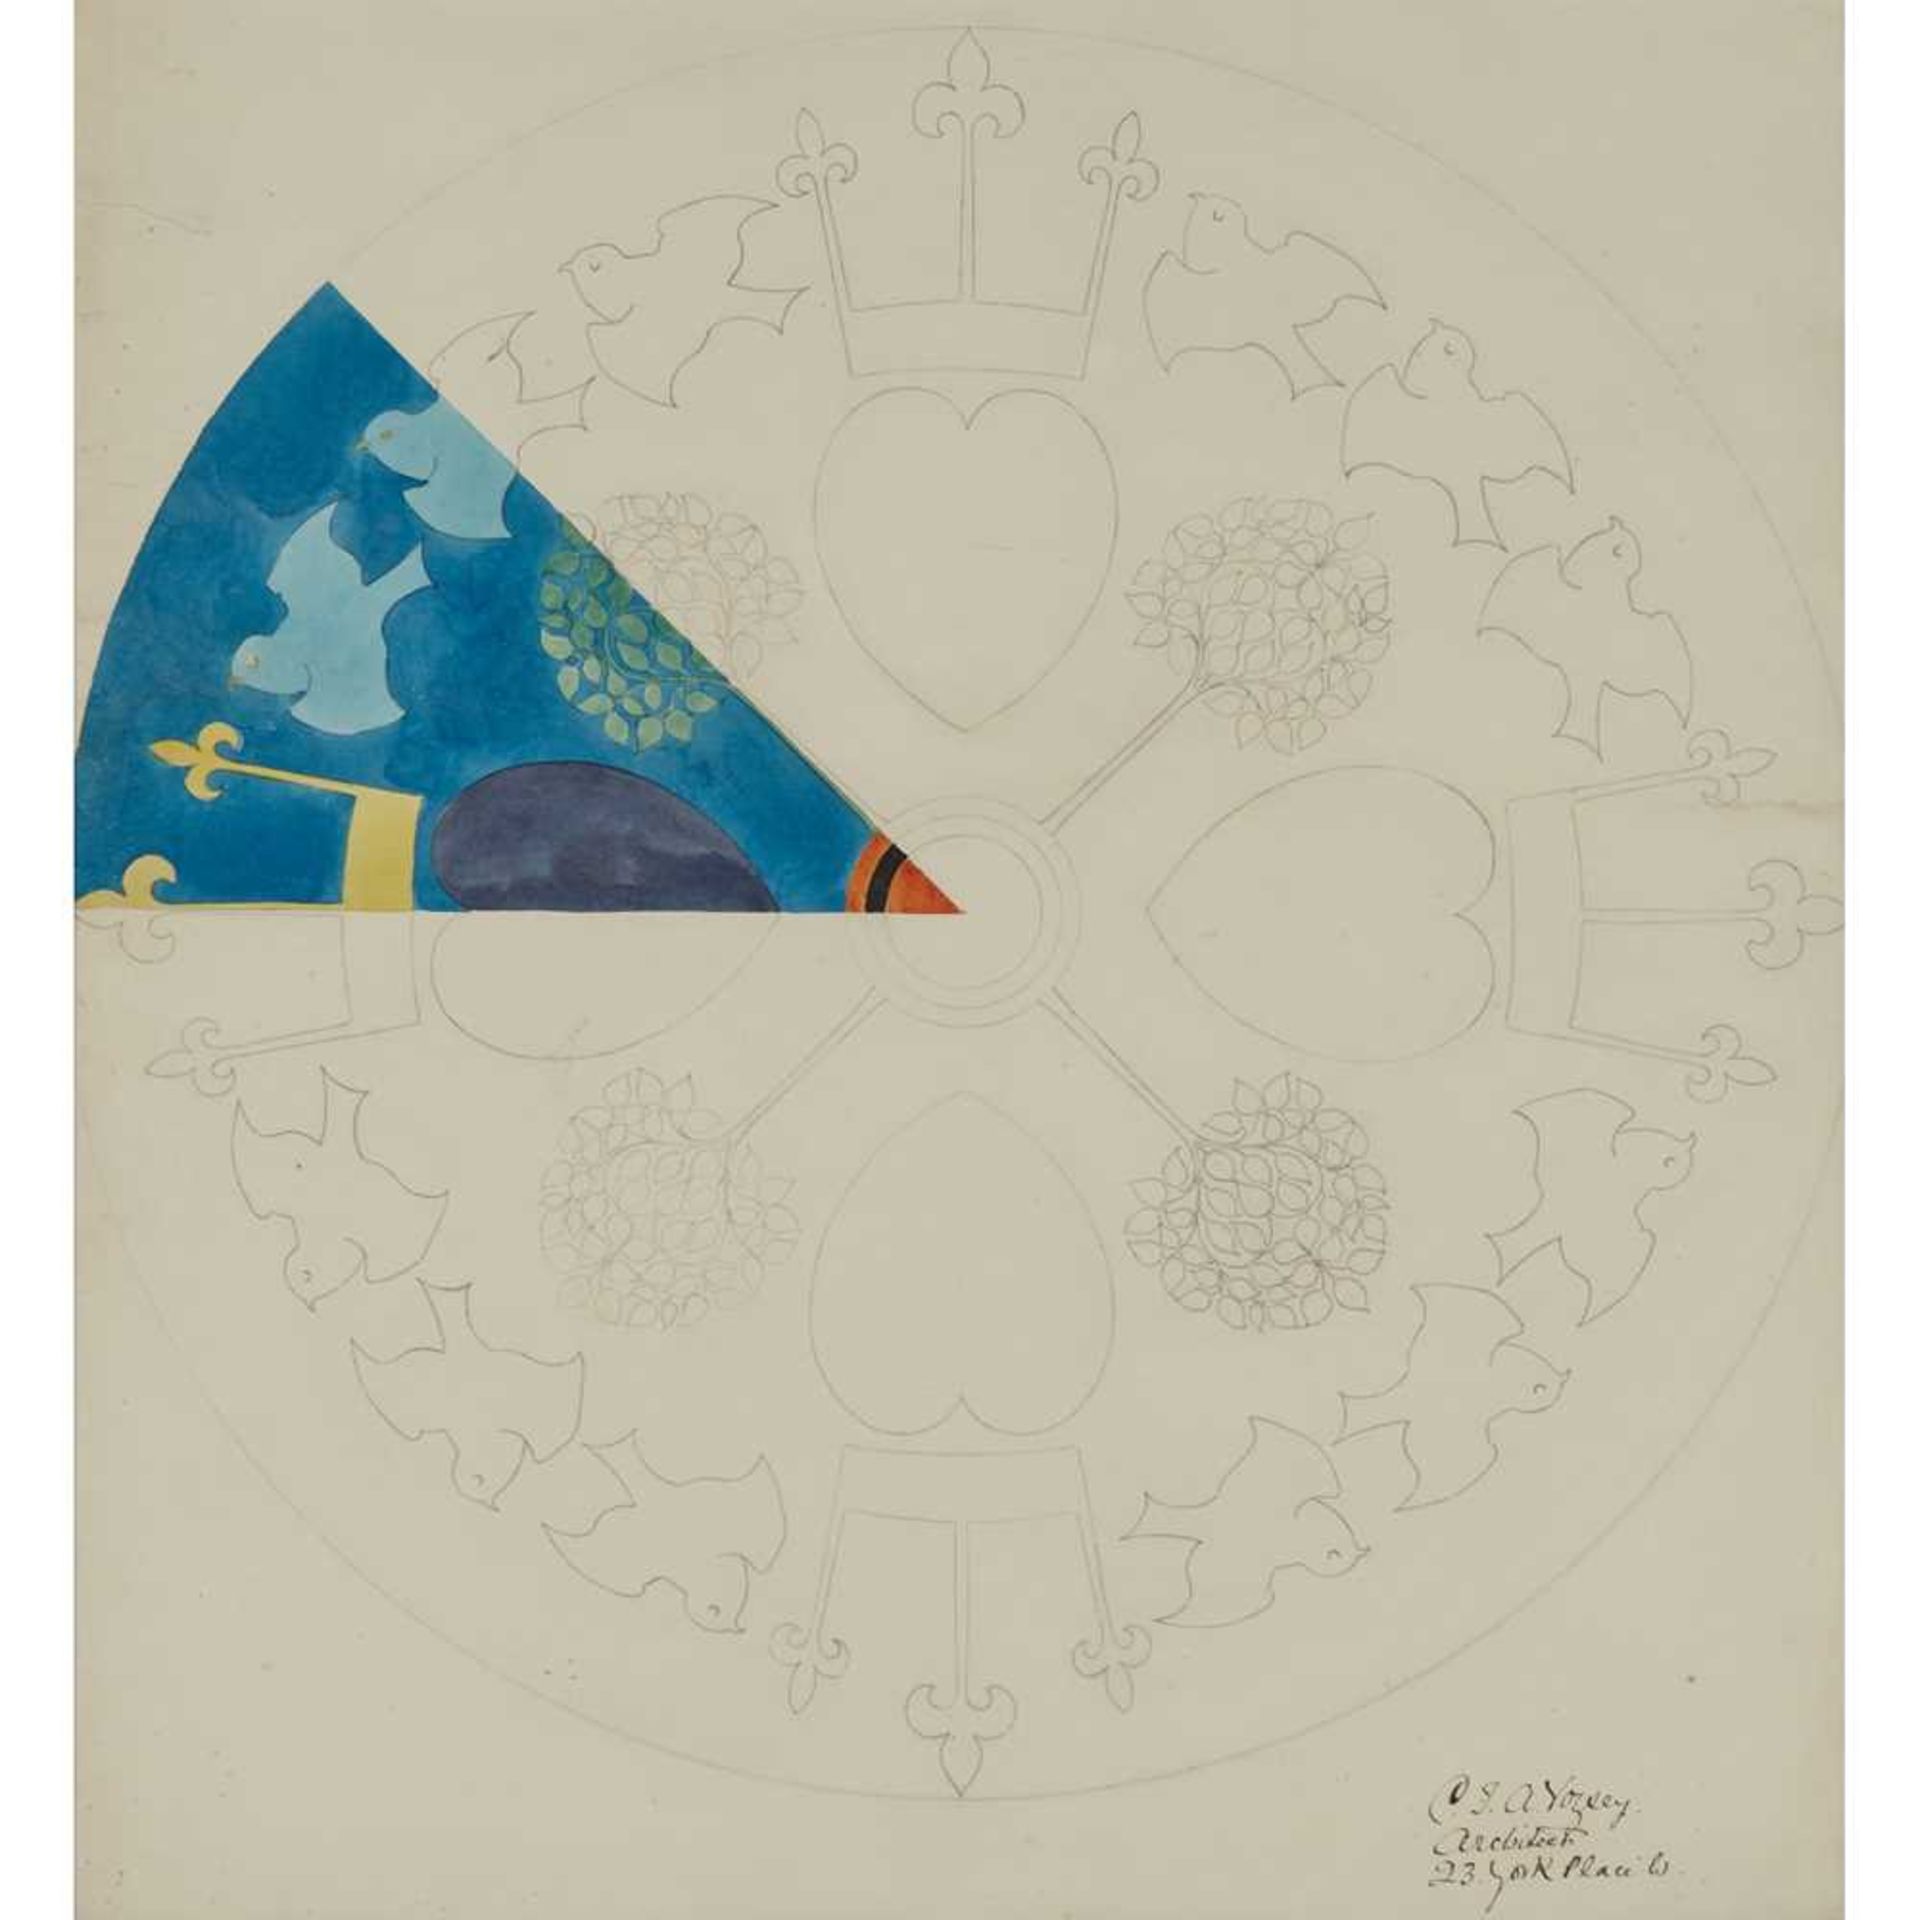 C.F.A. VOYSEY (1857-1941) DESIGN FOR A ROUNDEL WITH HEART, CROWN, BIRD AND TREE